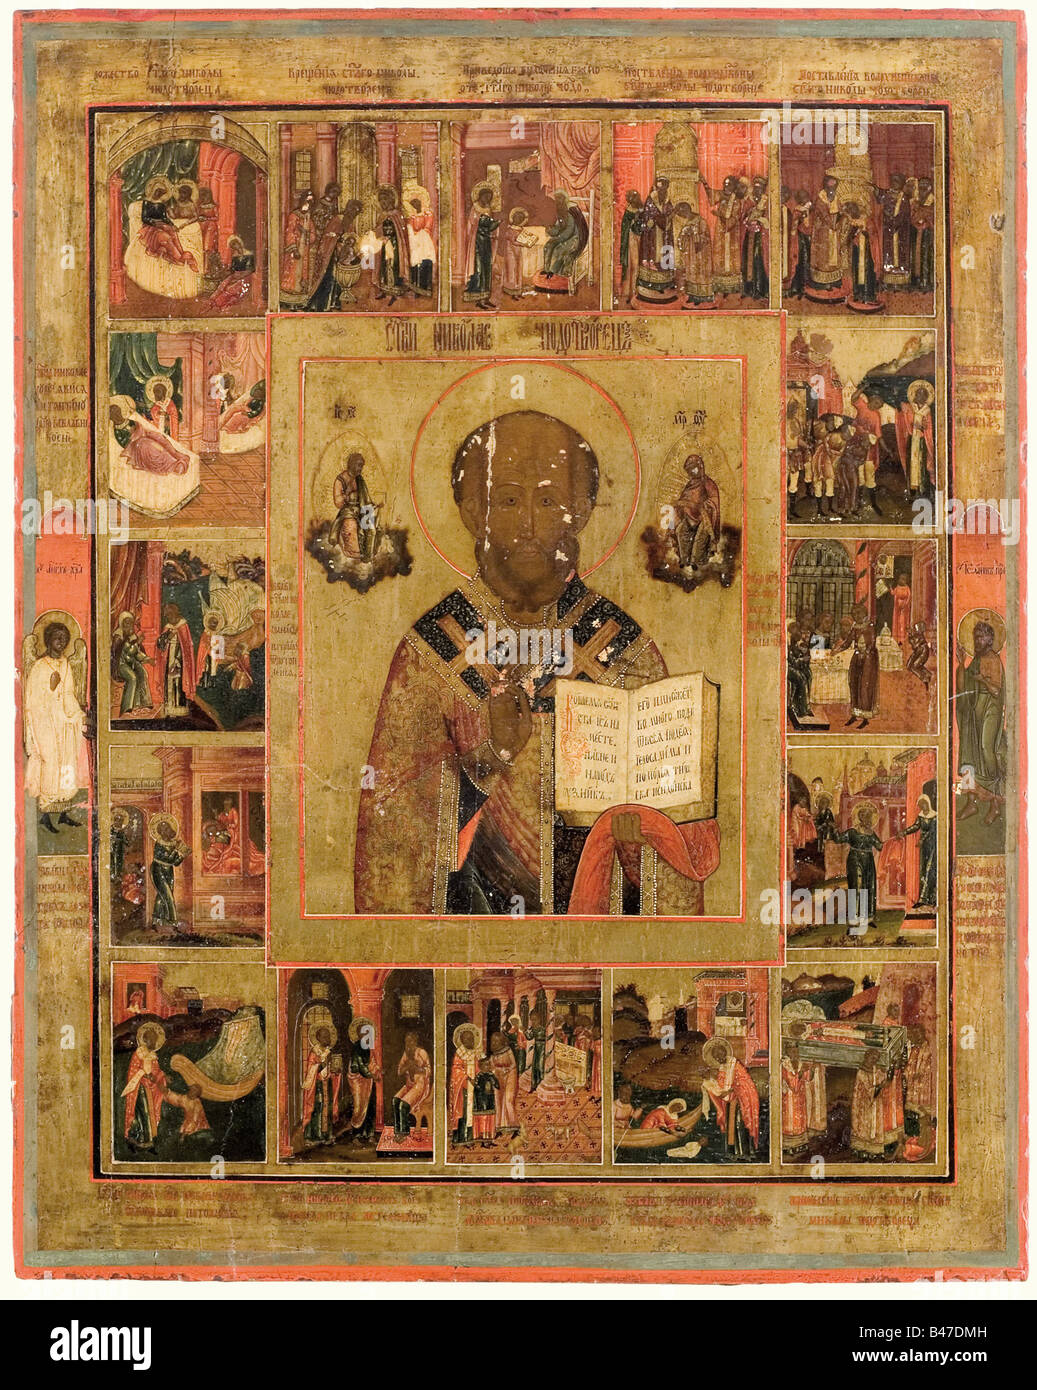 An icon, circa 1840. A picture of St. Nicholas in the centre, surrounded by scenes from his life. Mixed technique on wood. Edges somewhat dented. Tiny defects. Dimensions 58 x 72 cm. historic, historical, people, 19th century, fine arts, art, art object, art objects, artful, precious, collectible, collector's item, collectibles, collector's items, rarity, rarities, Stock Photo